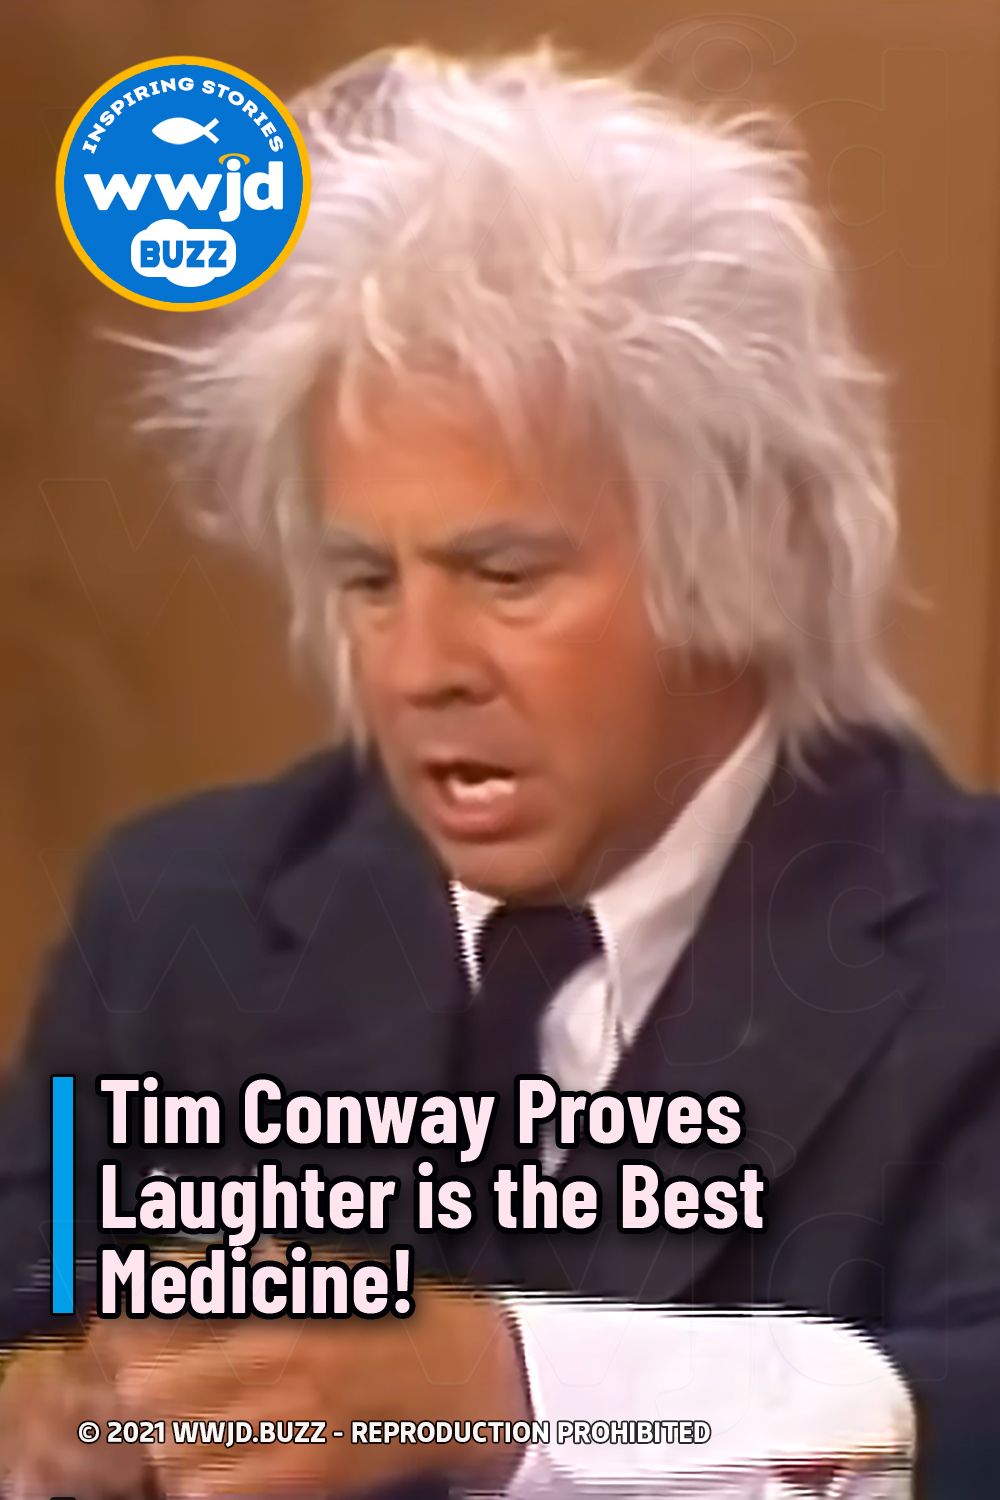 Tim Conway Proves Laughter is the Best Medicine!